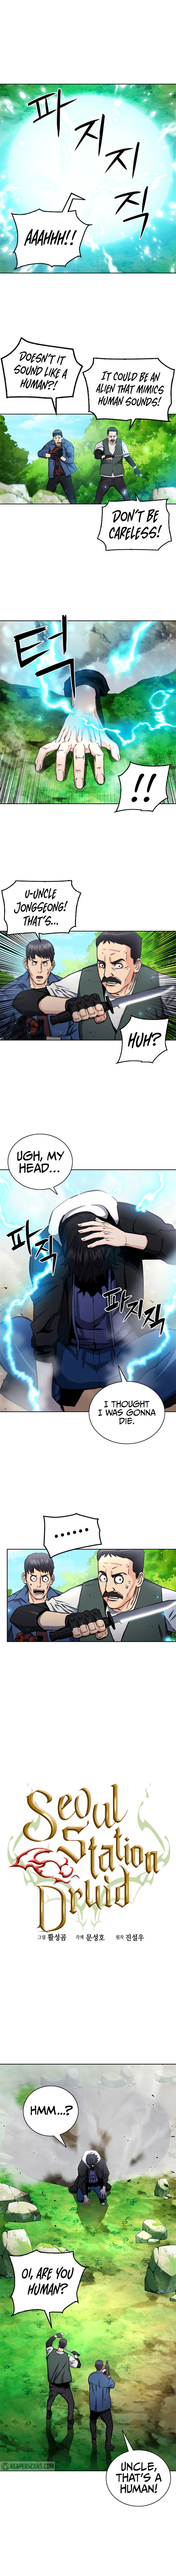 seoul station druid Chapter chapter 58